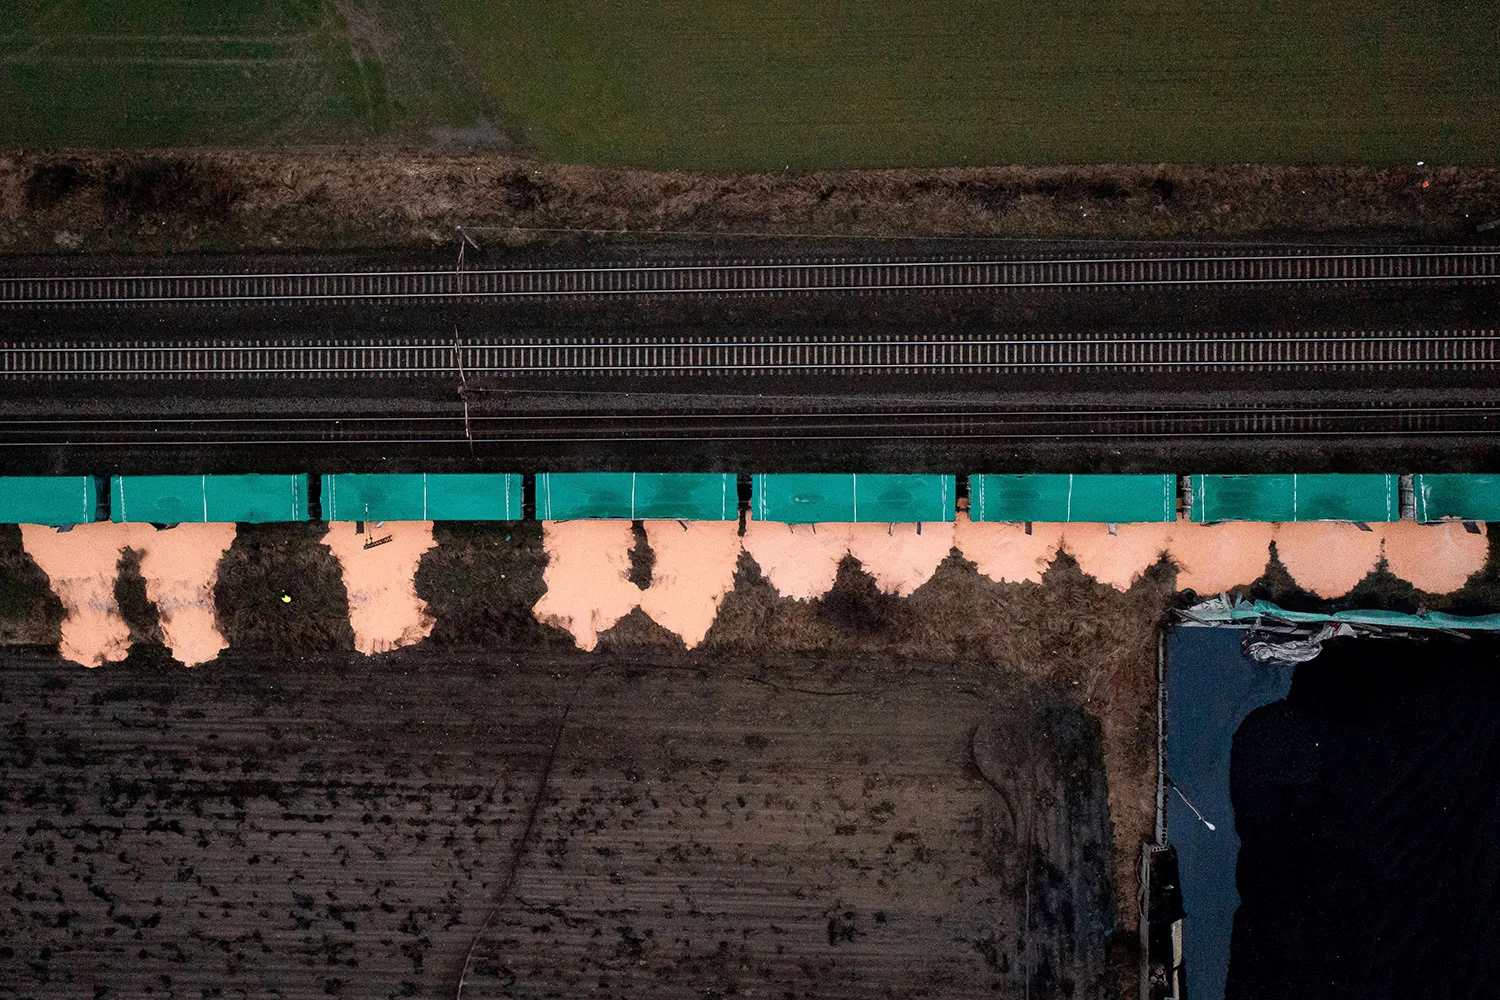 An aerial view shows piles of corn lying next to eight teal train cars on railroad tracks in the village of Kotomierz, Poland.